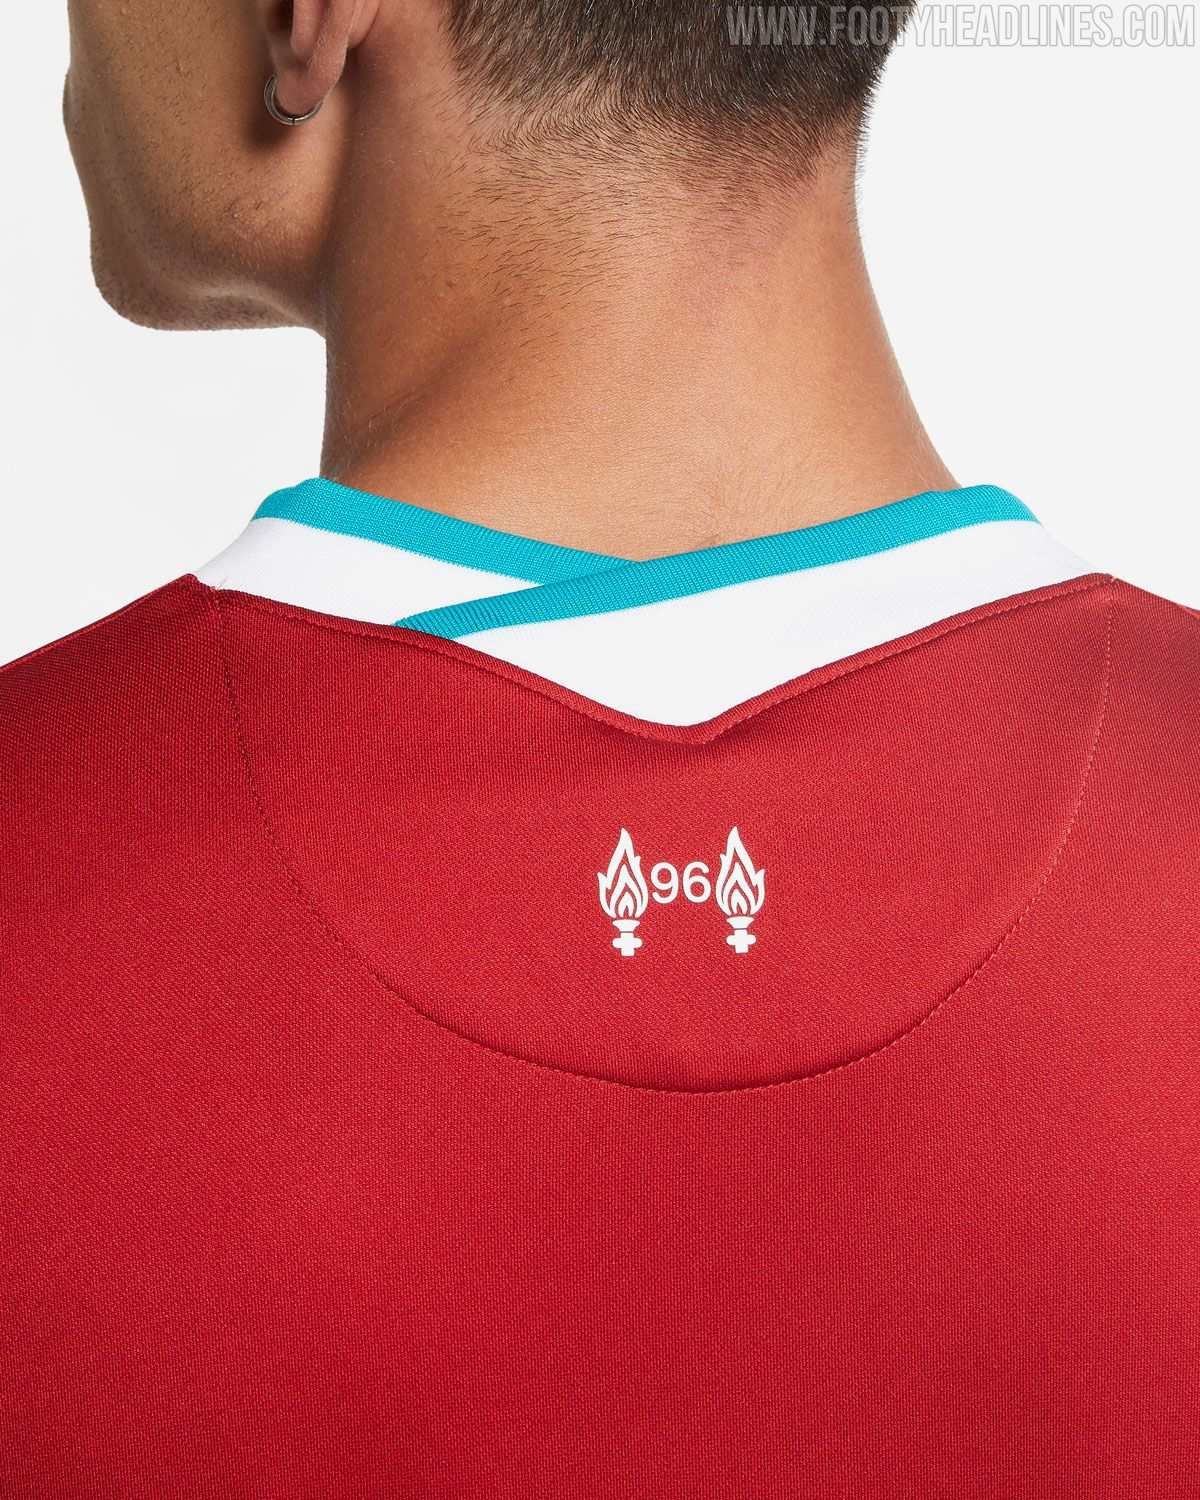 In Detail - Nike 2020-21 100 GBP Authentic vs 70 GBP Replica Kits ...